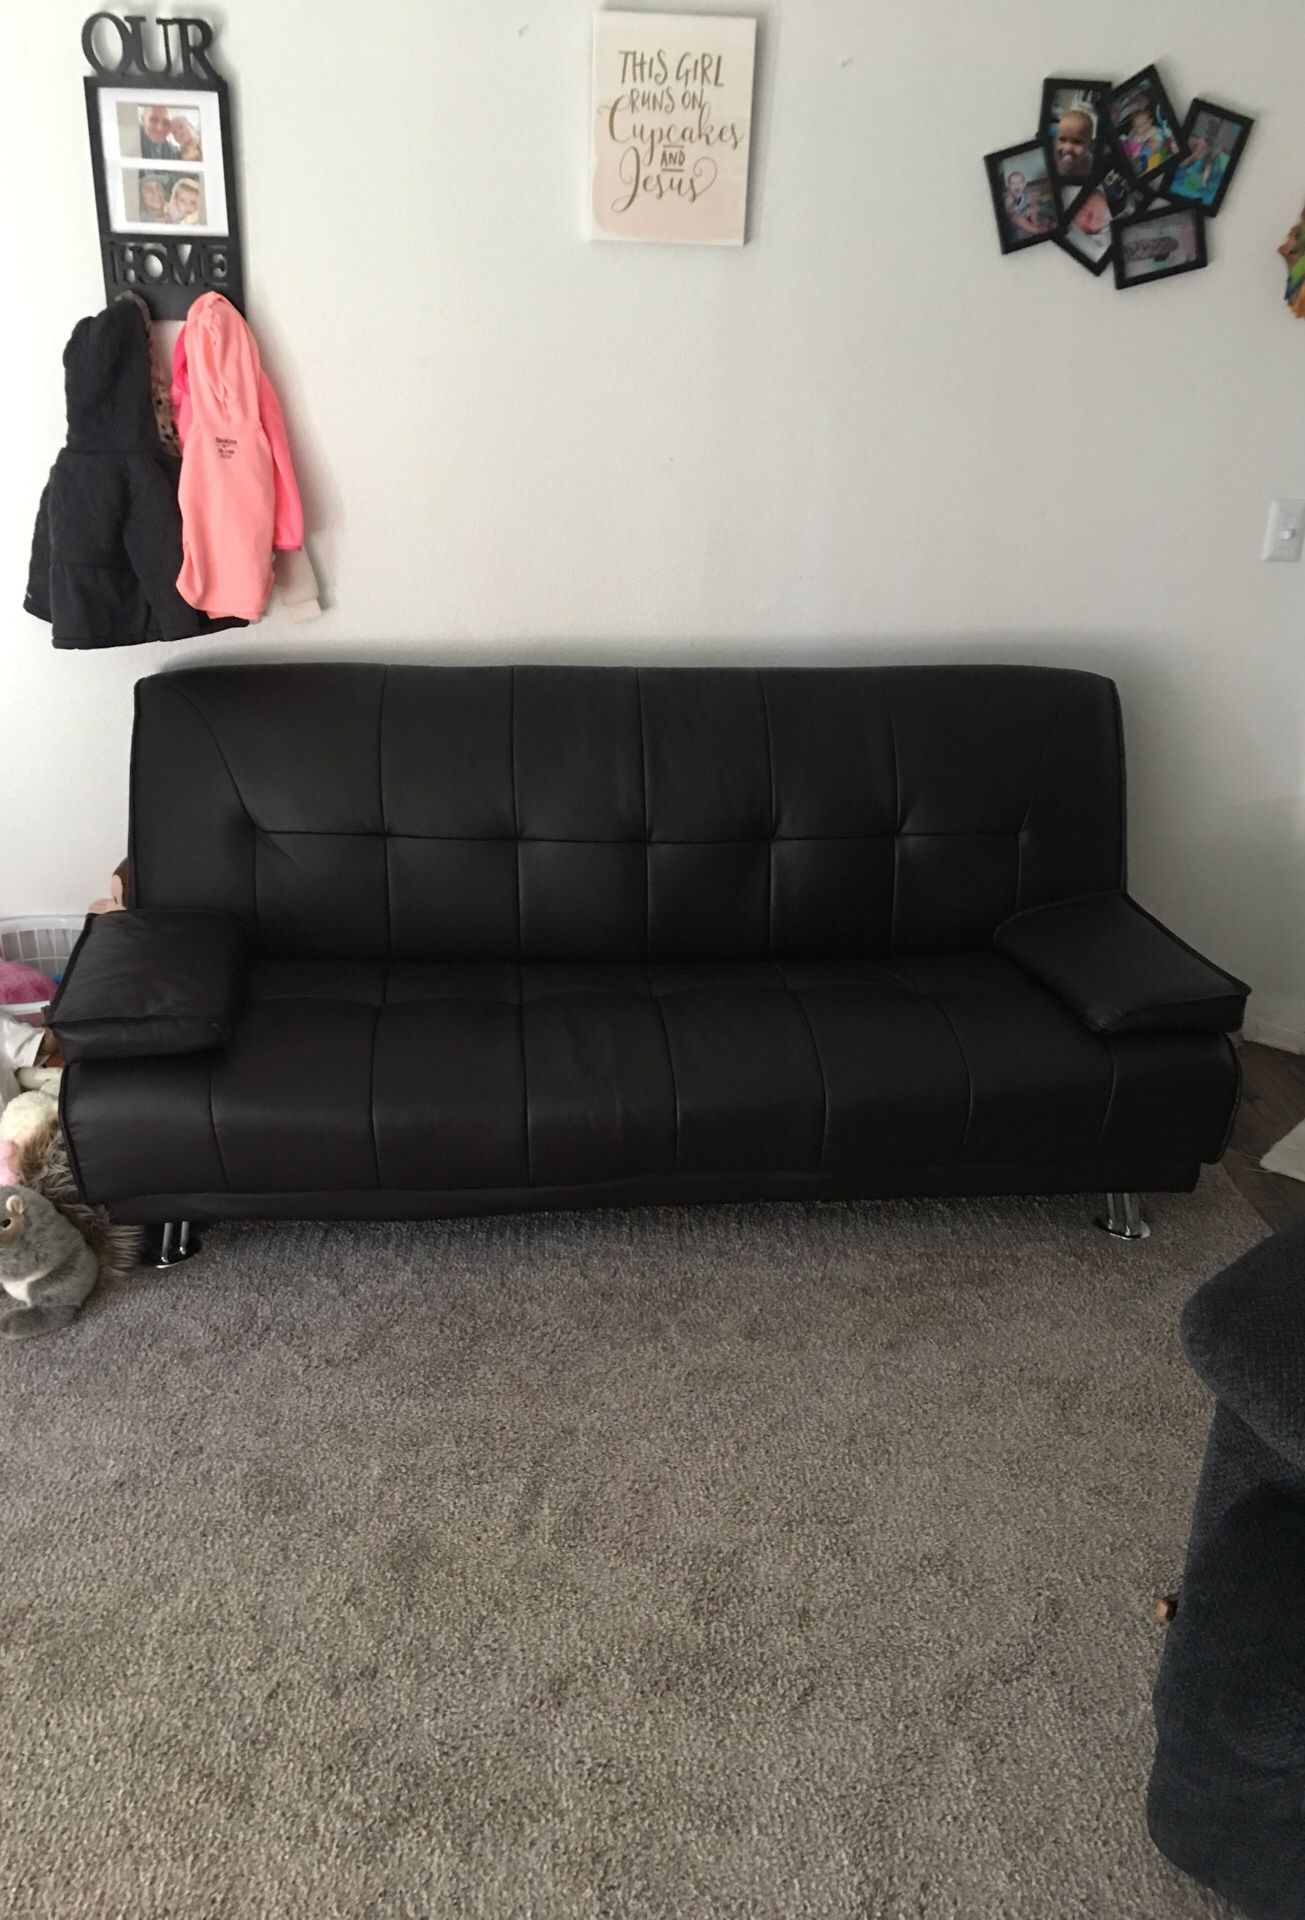 fold out couch